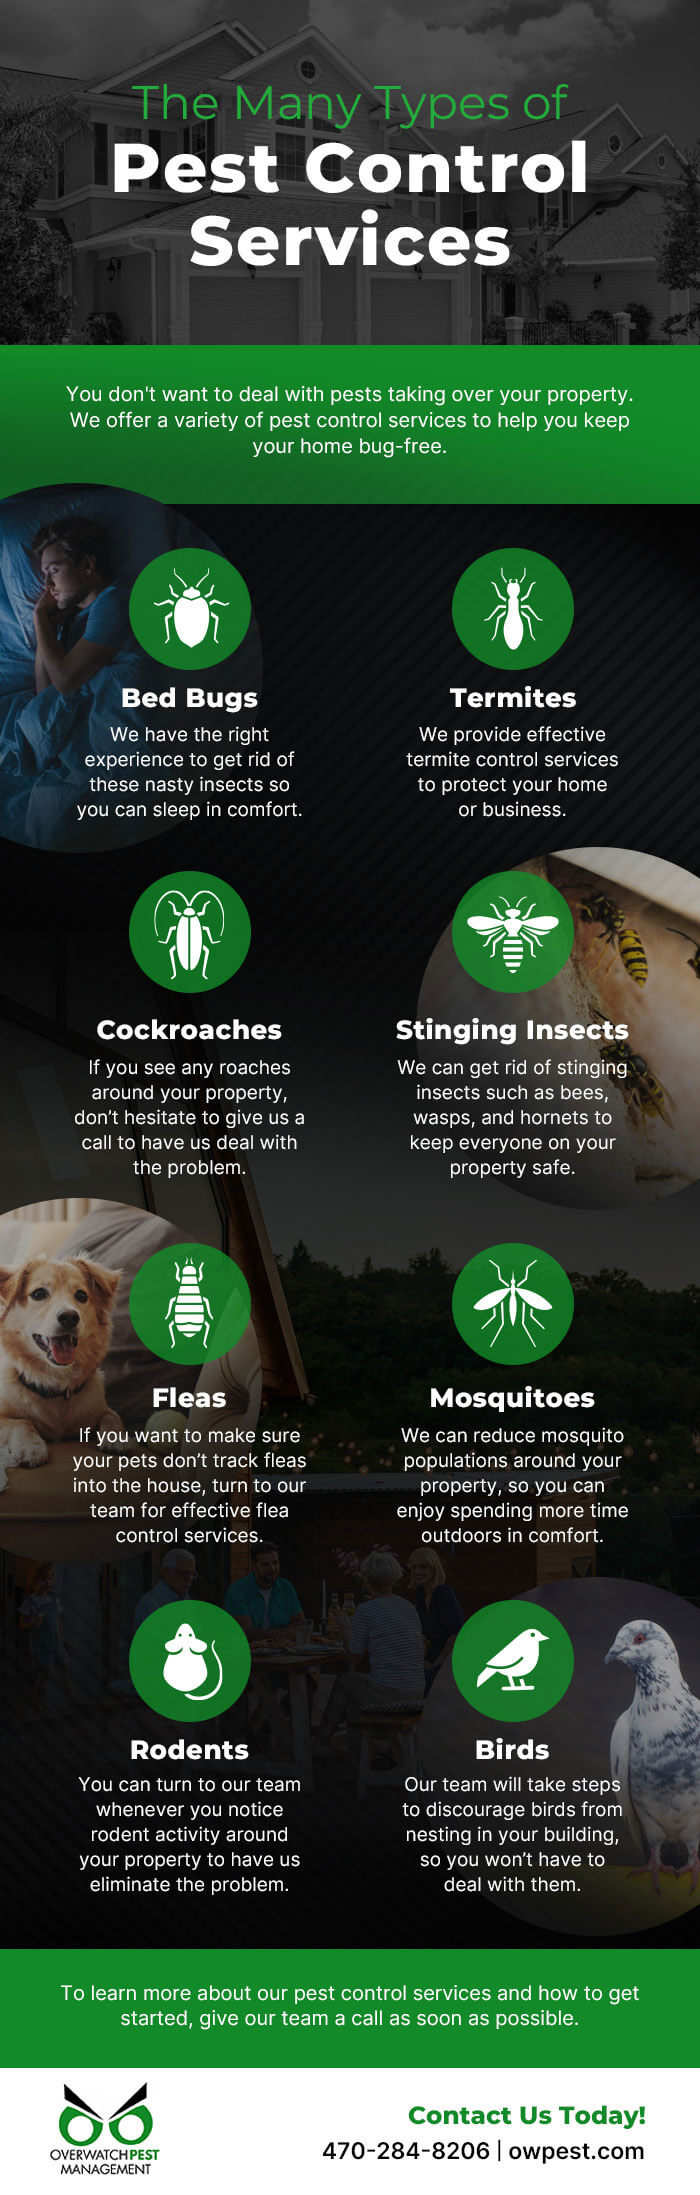 We’re here to eliminate all kinds of pests from your home!